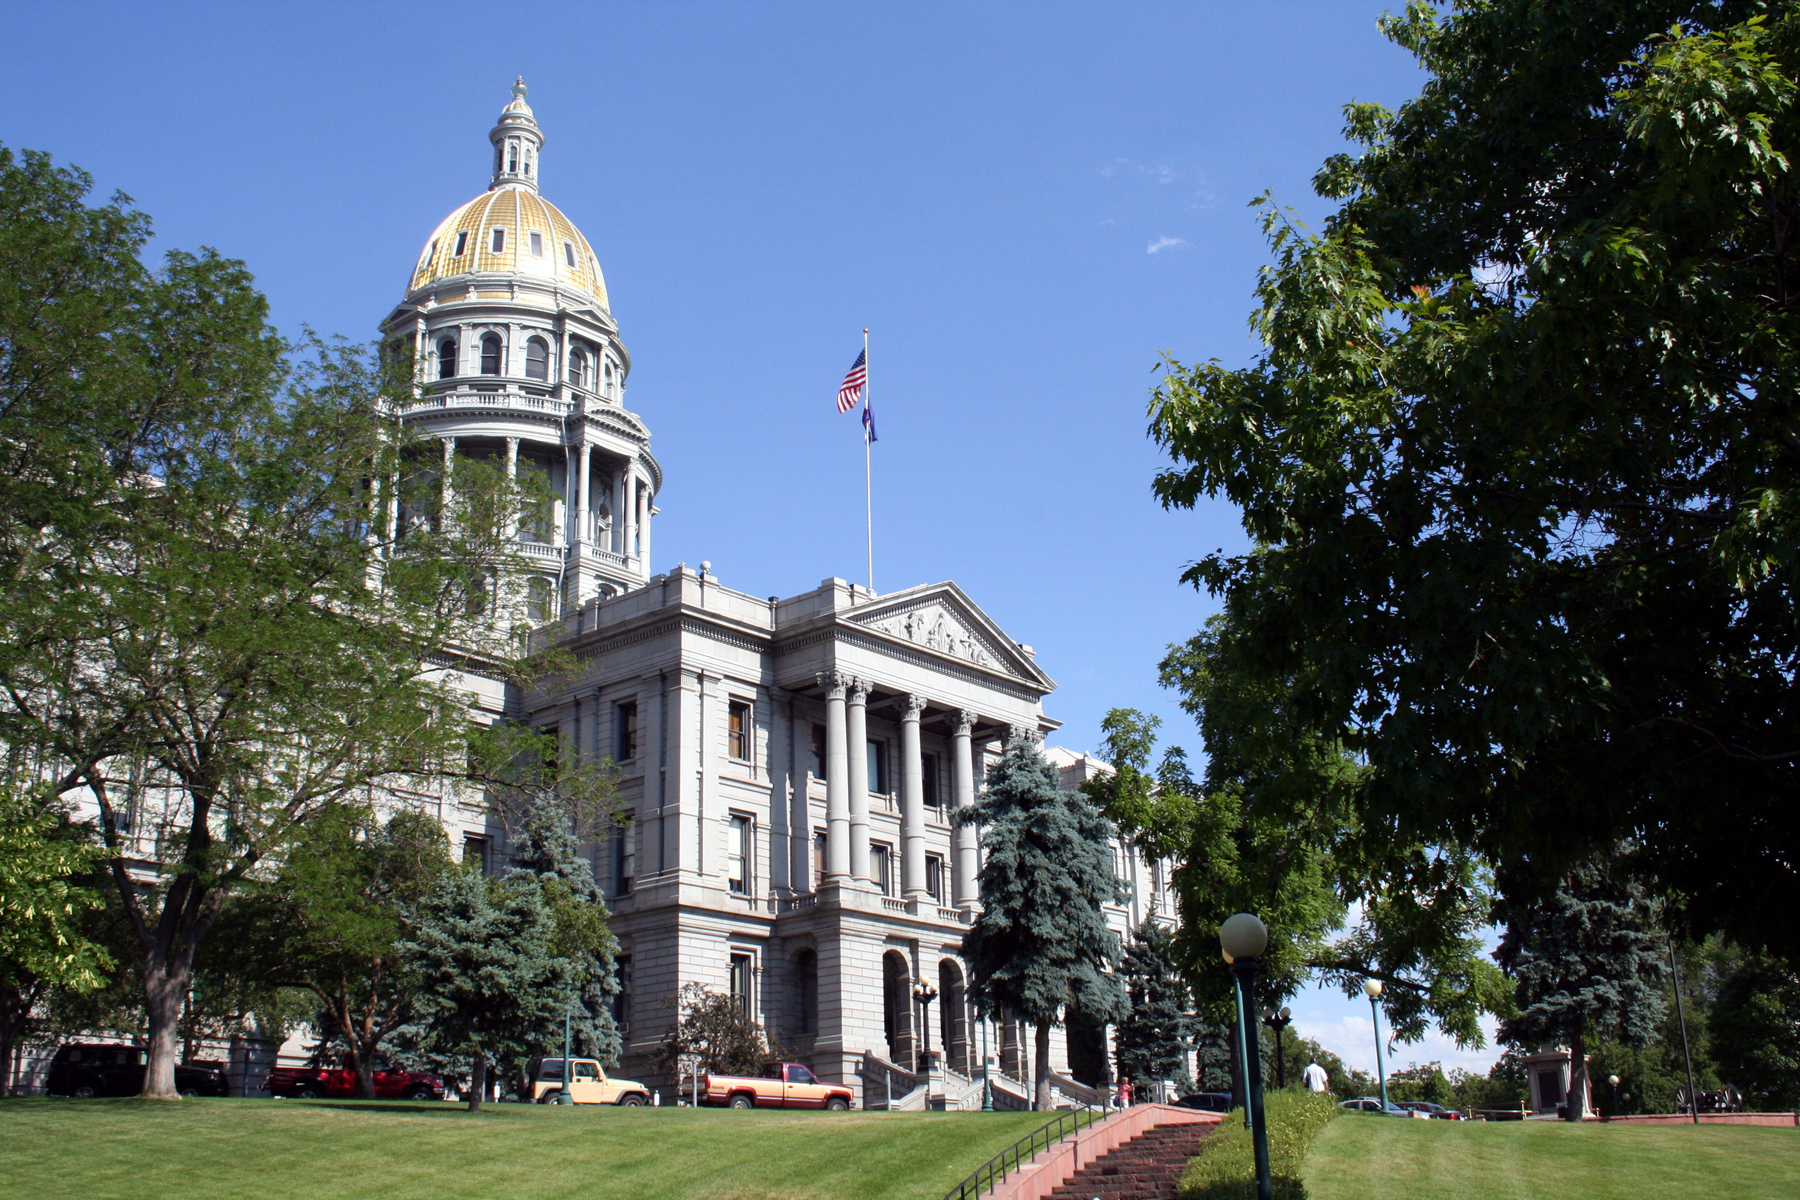 The state capitol building in Denver, Colorado.